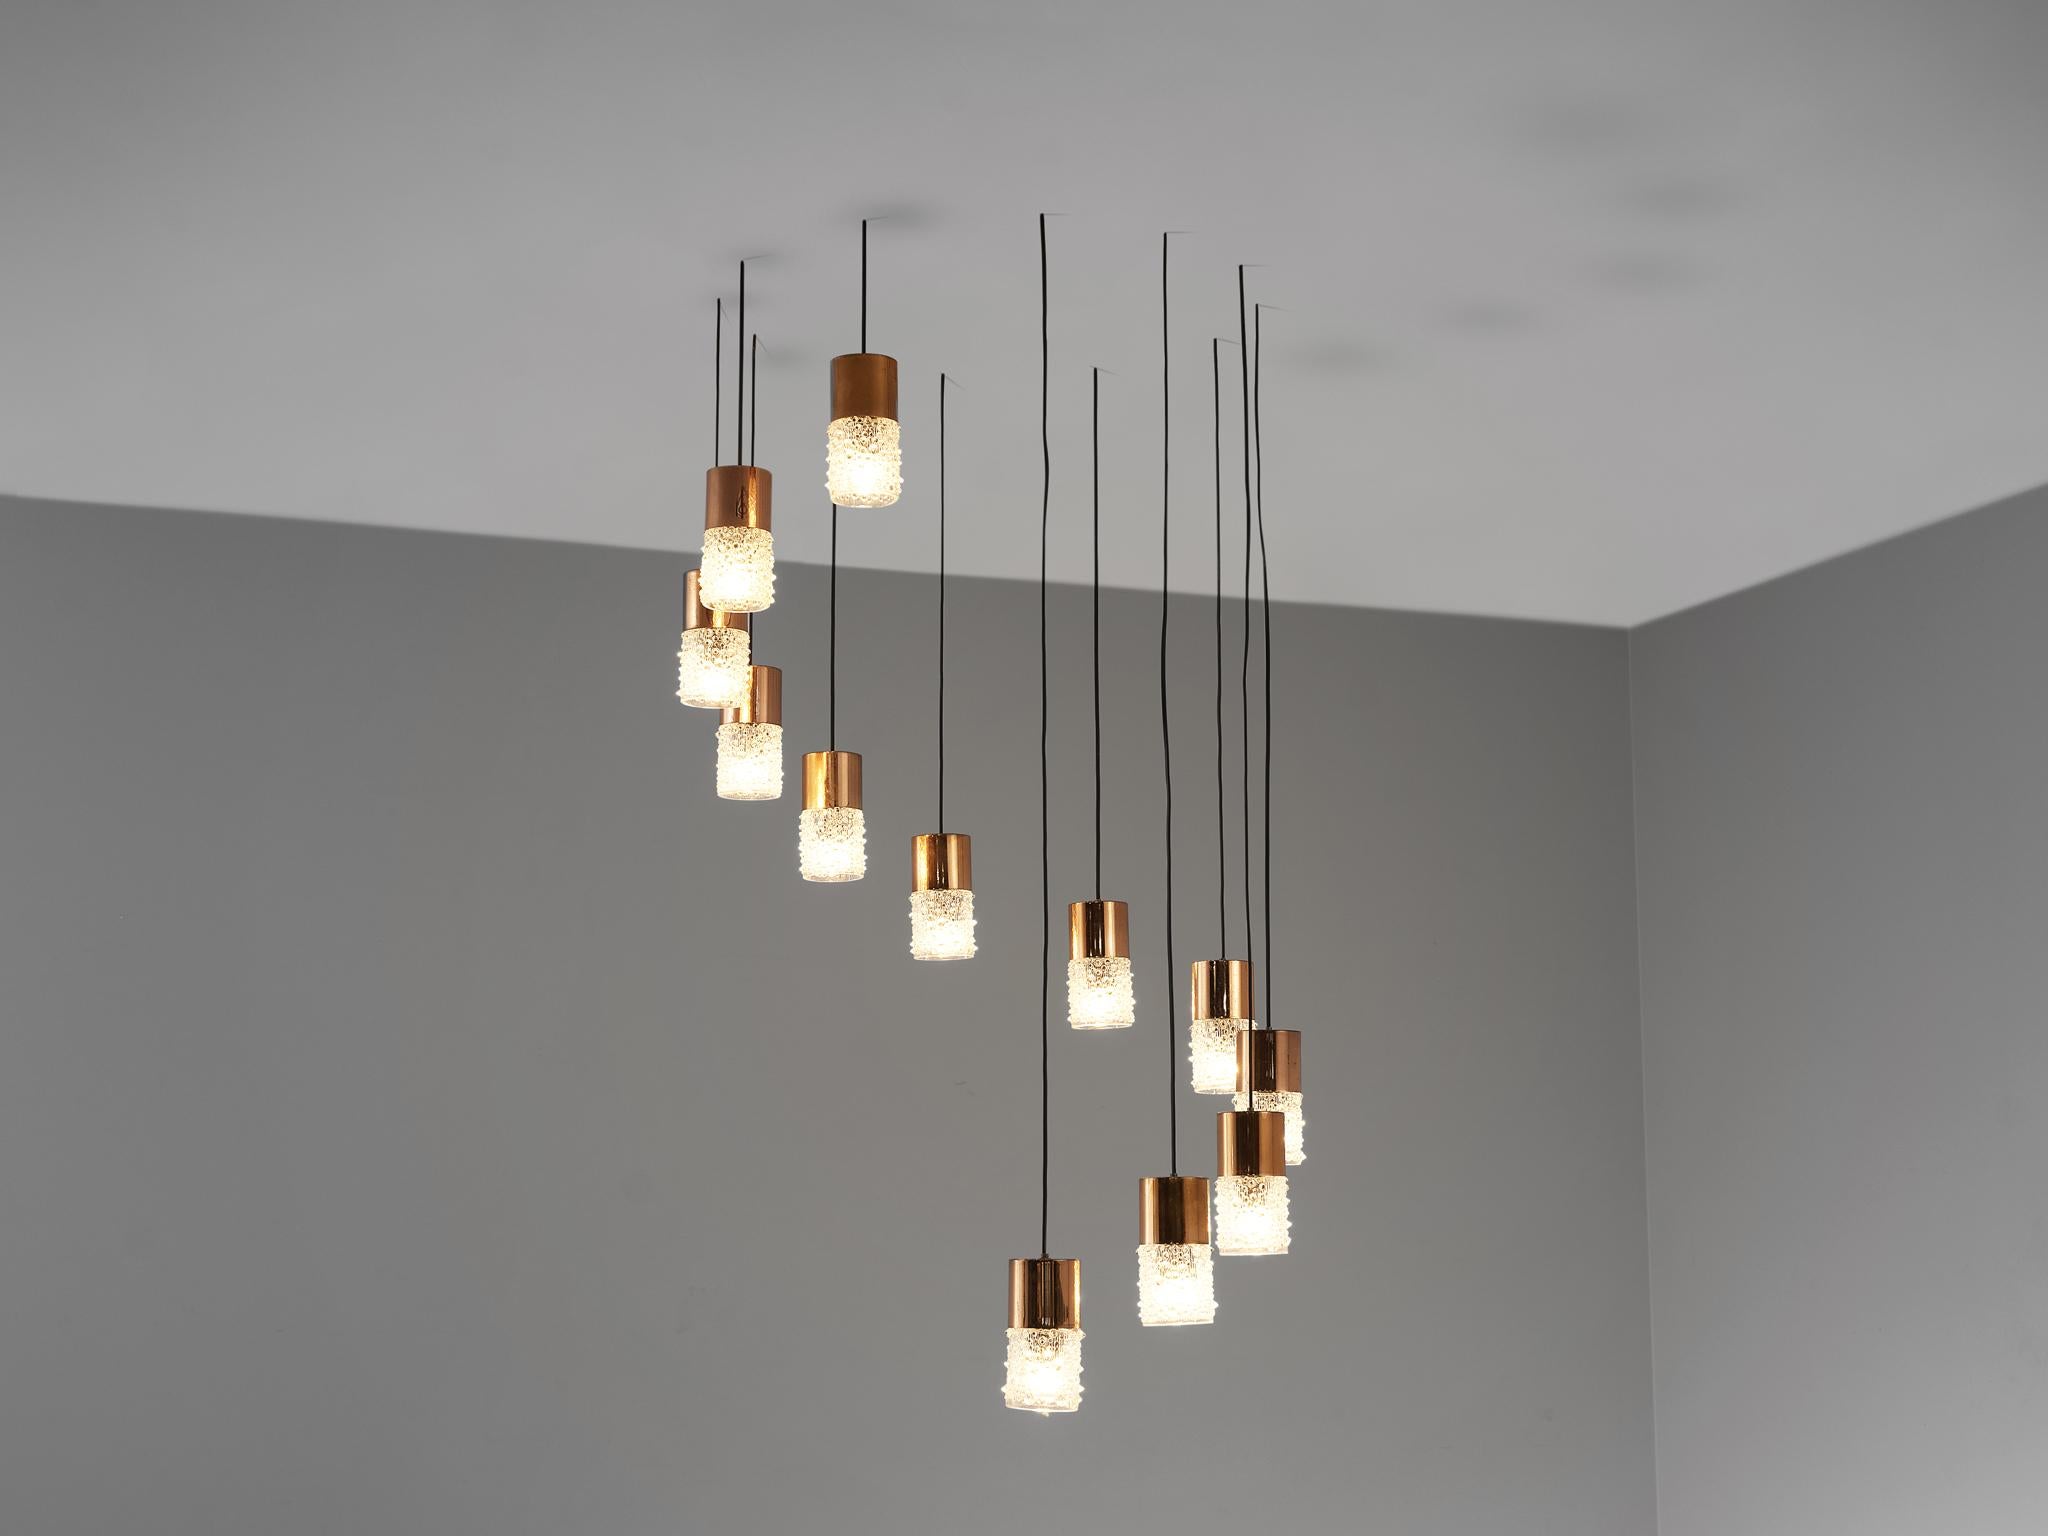 Pendants, copper, glass, Europe, 1960s

This stunning cylindrical pendant features an exquisite lamp shade showing a nice structure of little ‘bubbles’ or raindrops and geometrical lines. This results in a nice and soft light-tone creating an